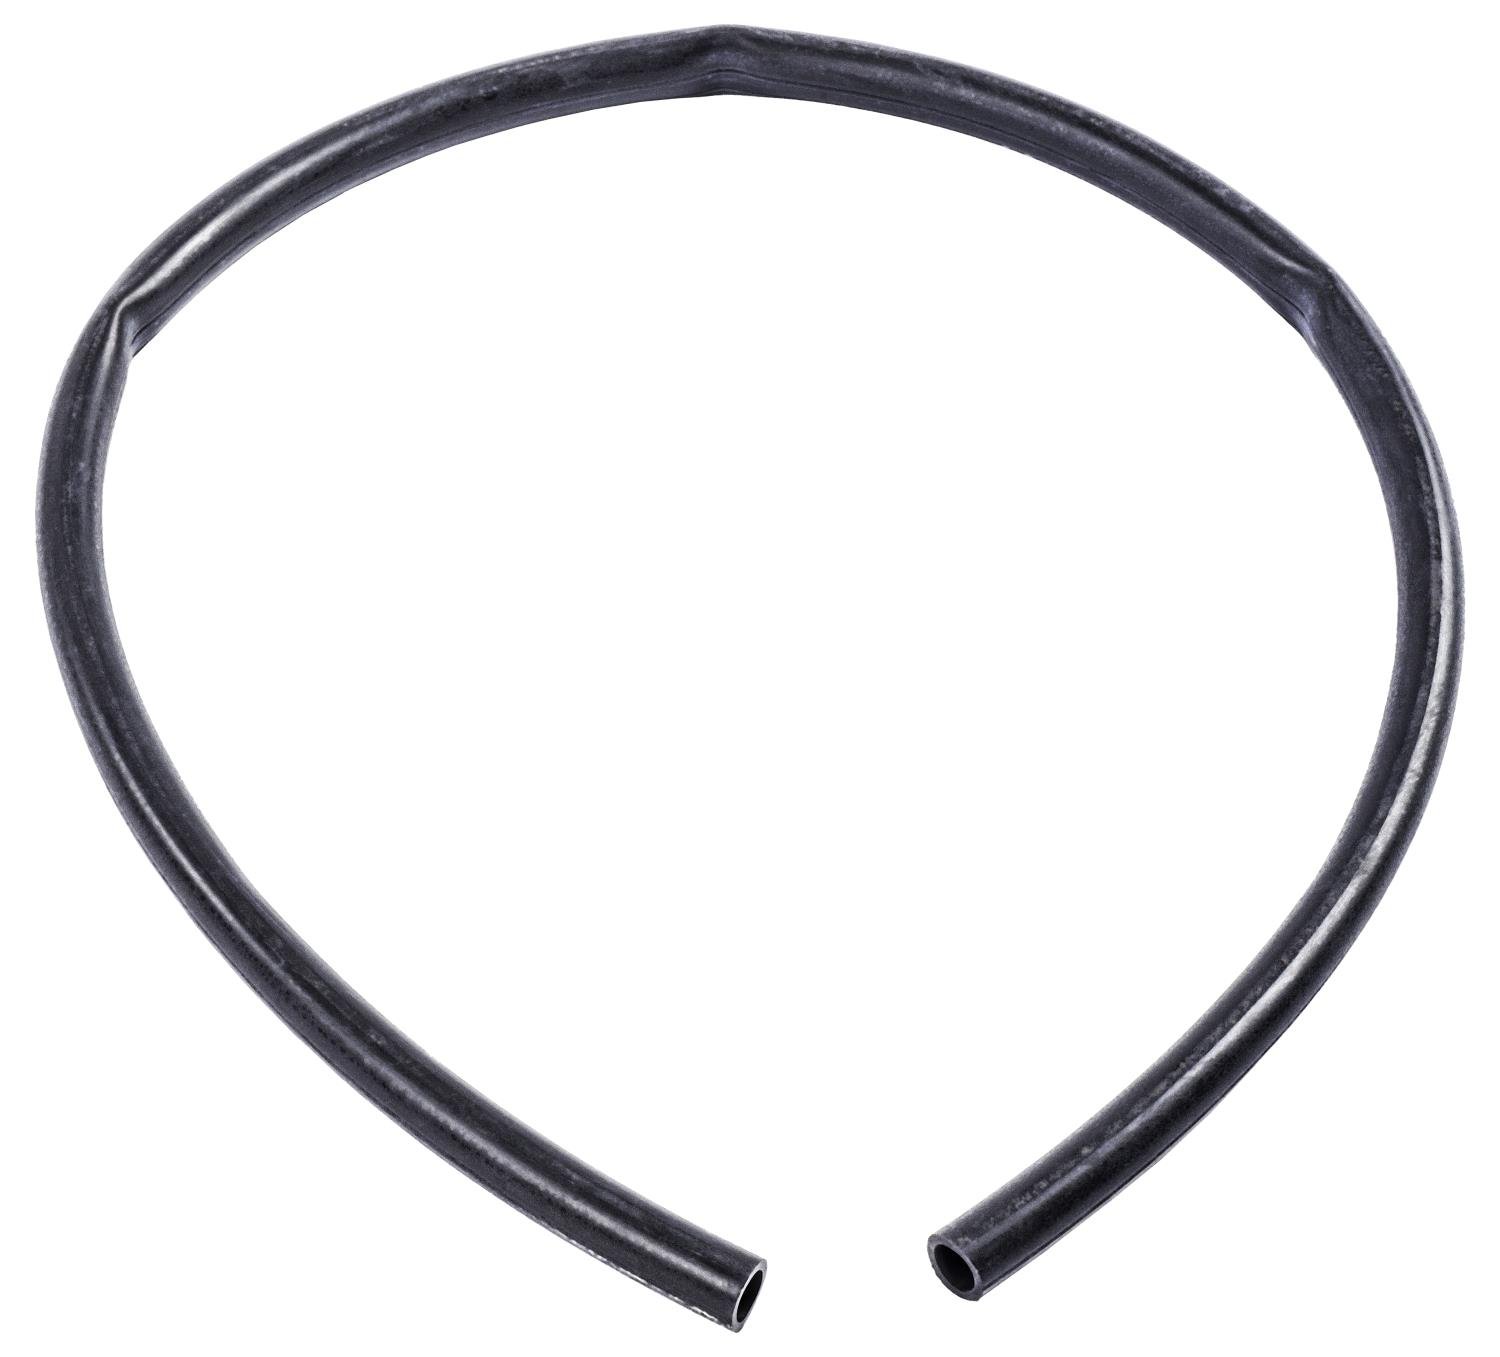 Radiator Overflow Hose Fits Select 1962-1992 GM Models [3/8 in. ID]